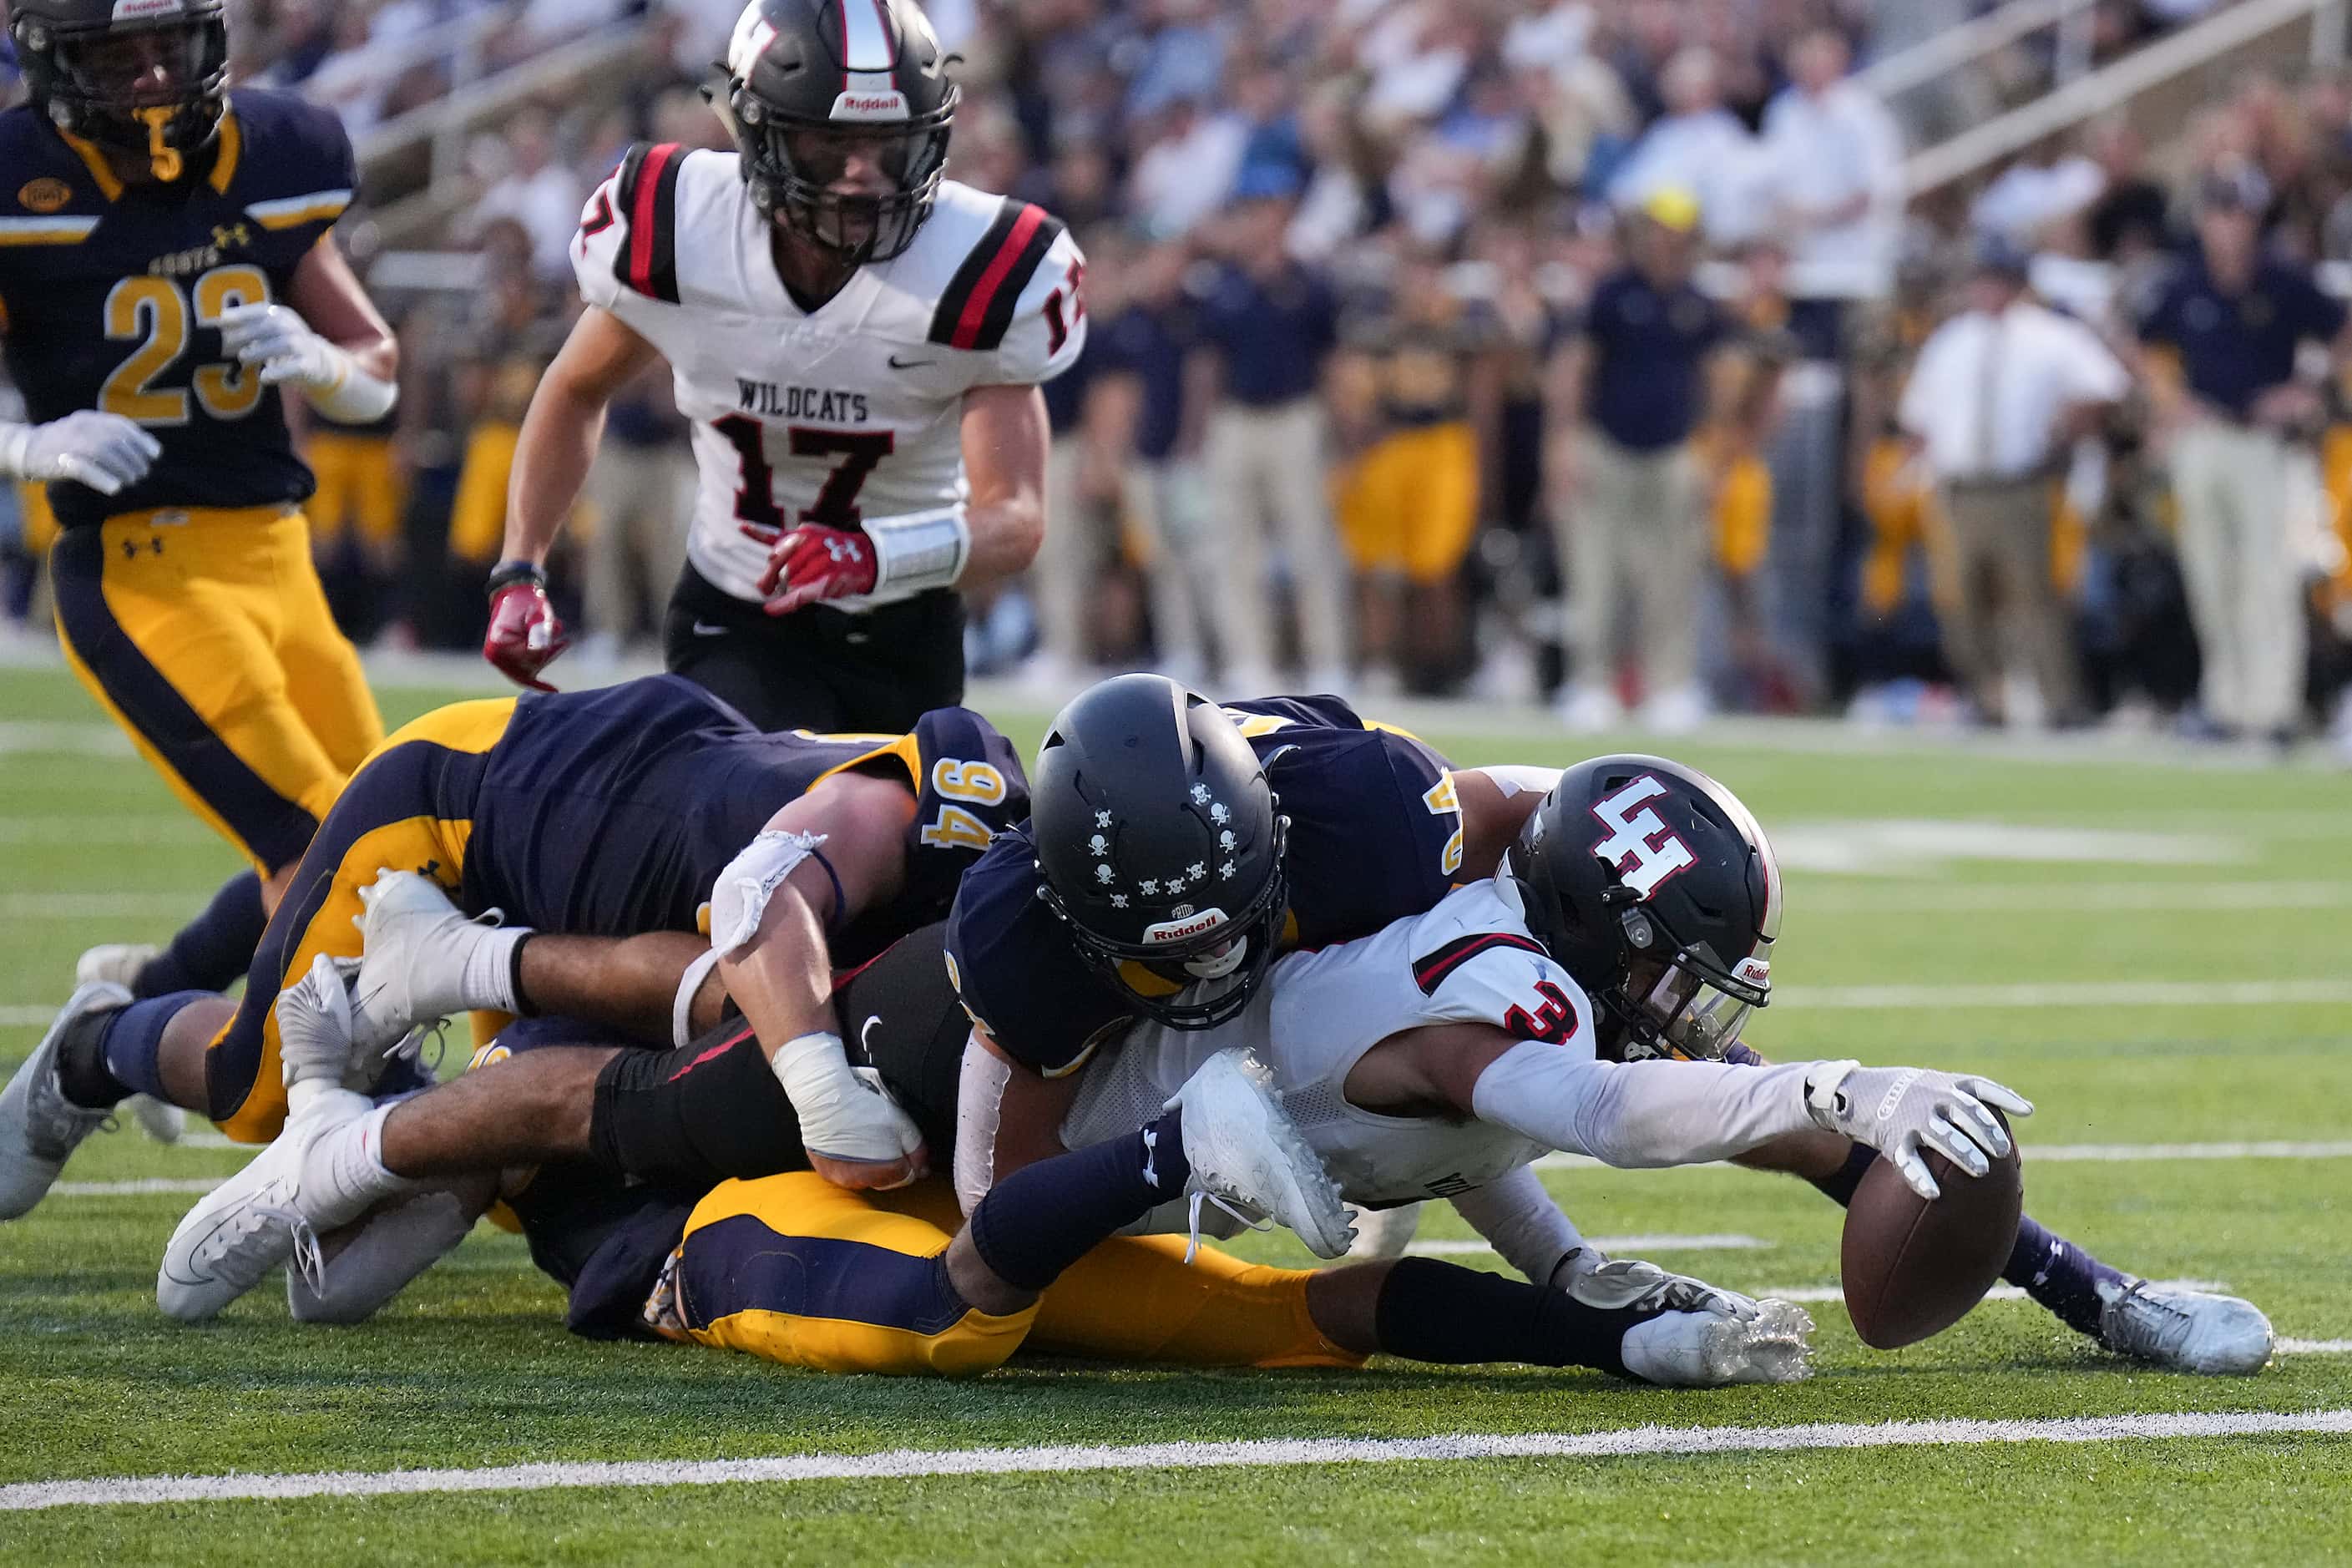 Lake Highlands running back Deonte Dean (3) dives for the end zone to score on a touchdown...